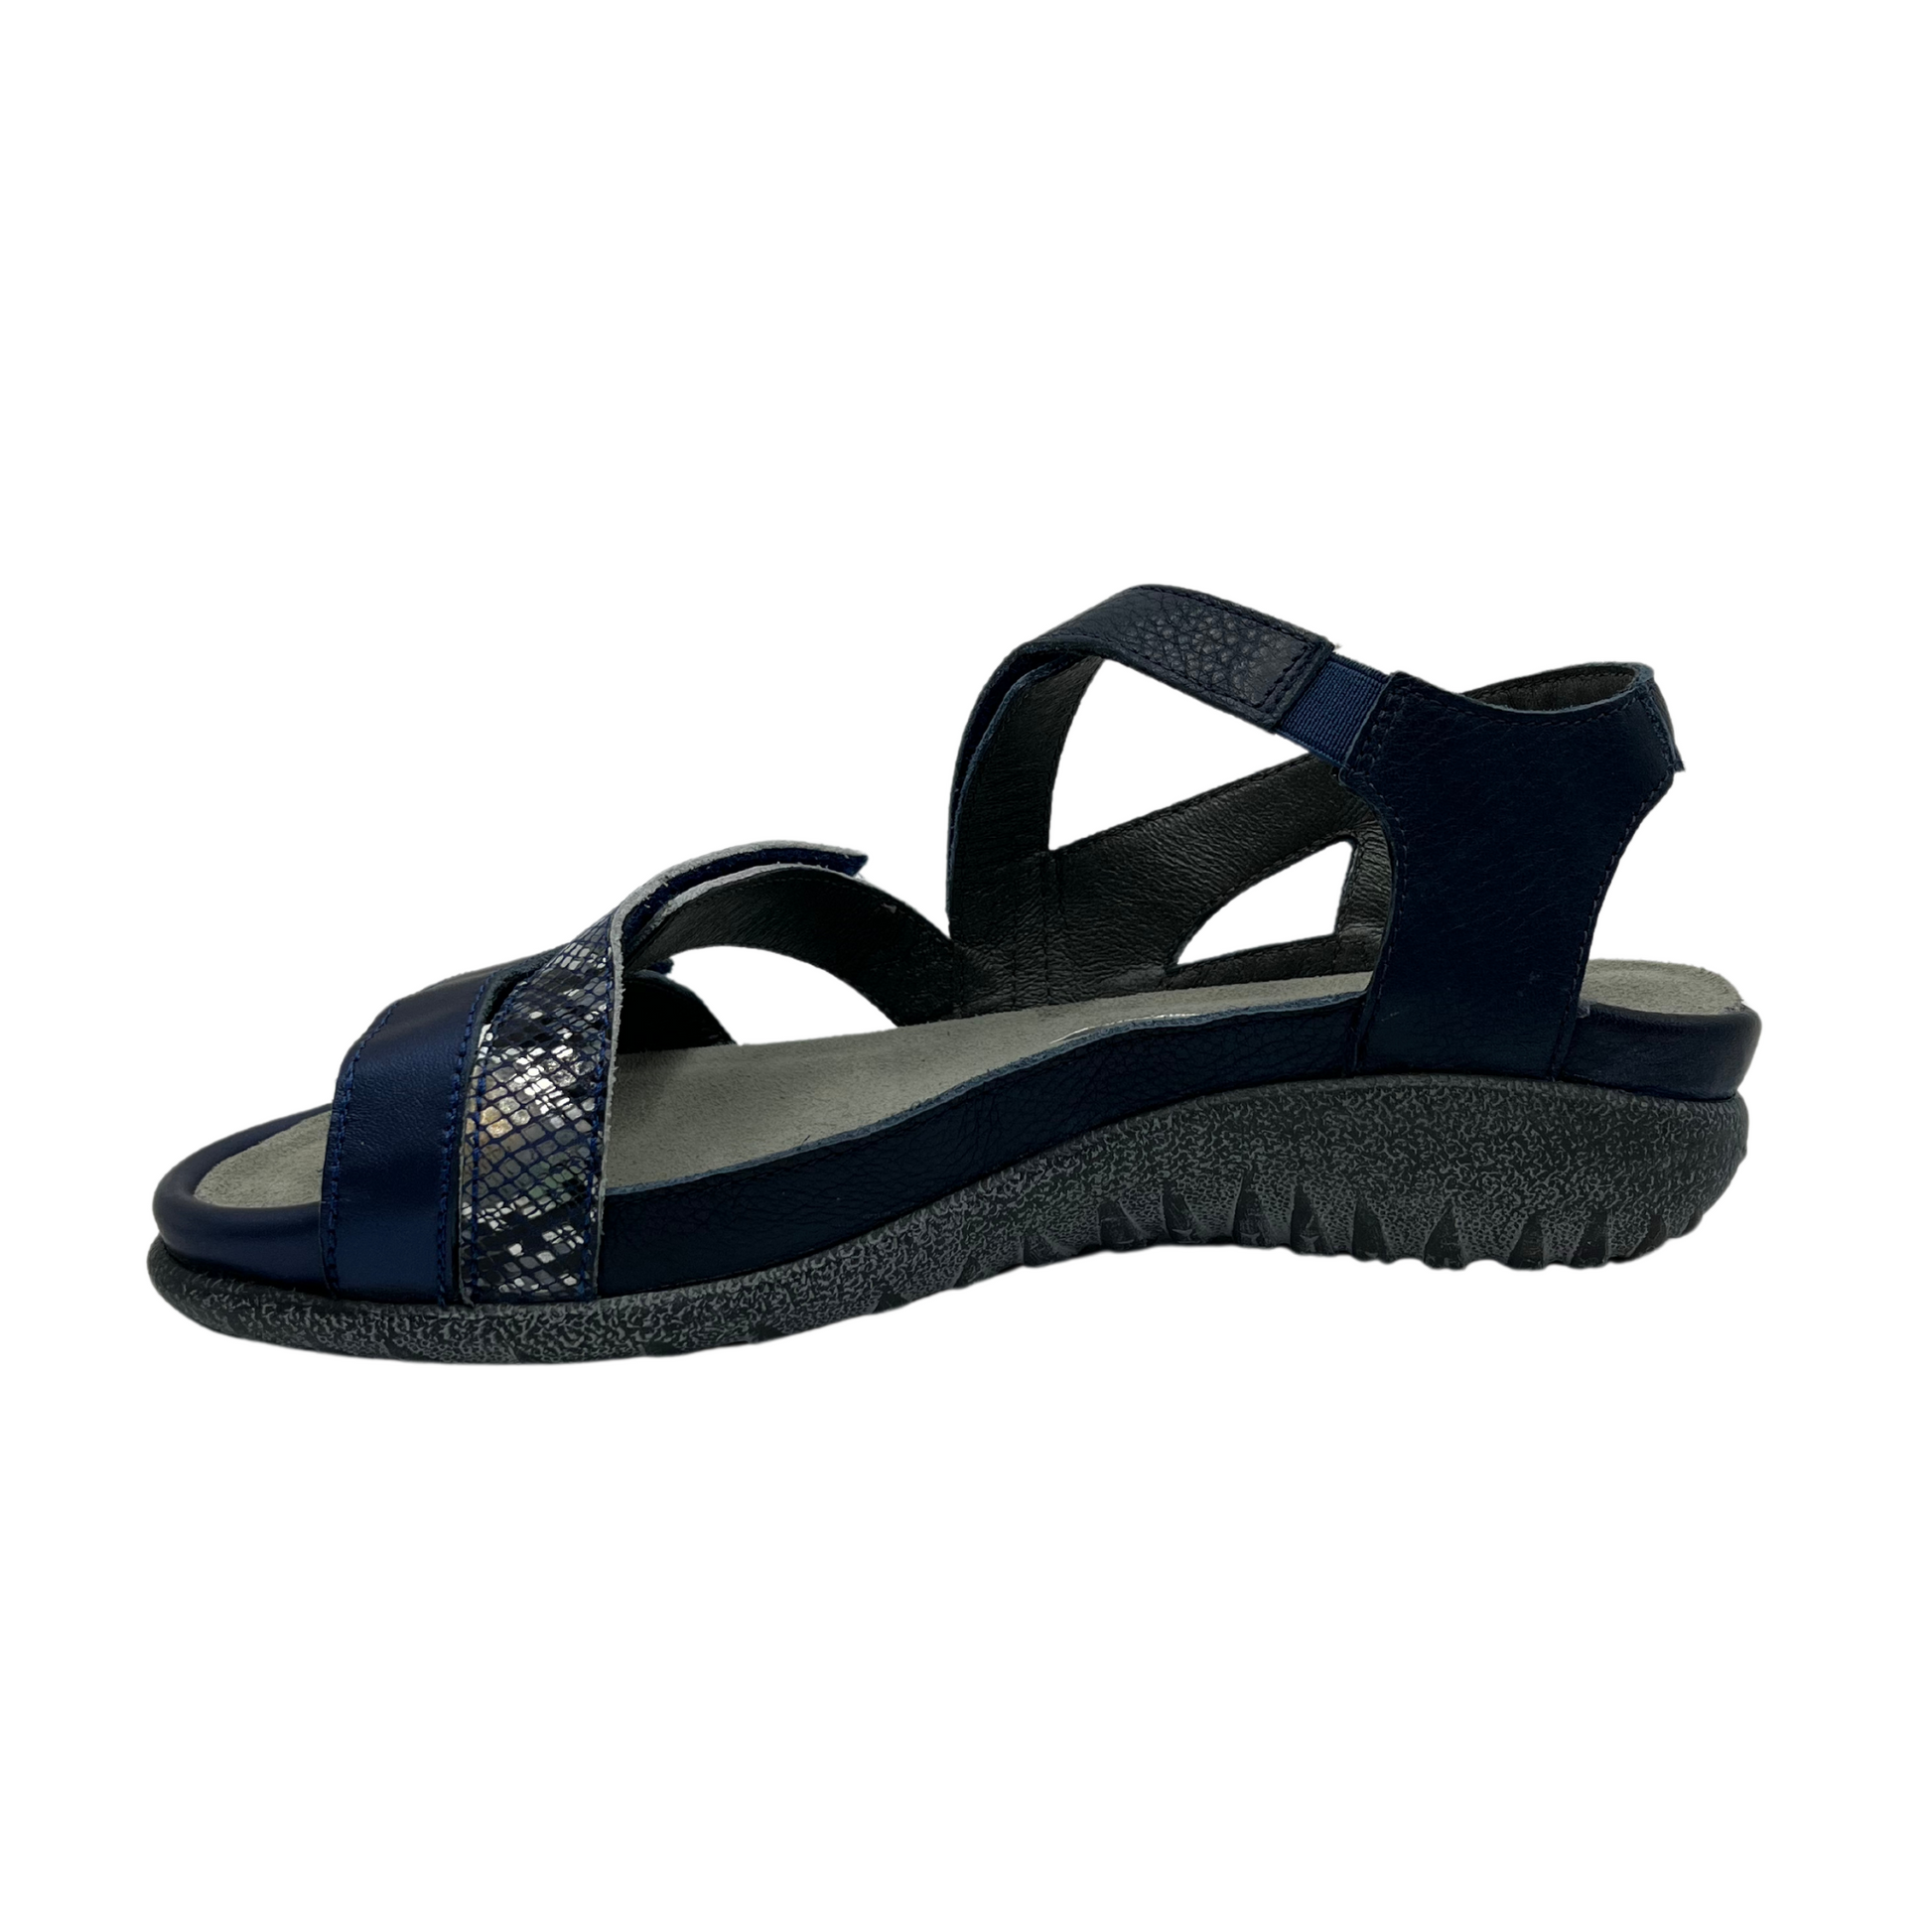 Left facing view of navy leather sandal with 3 velcro straps, wedge sole and metallic detail